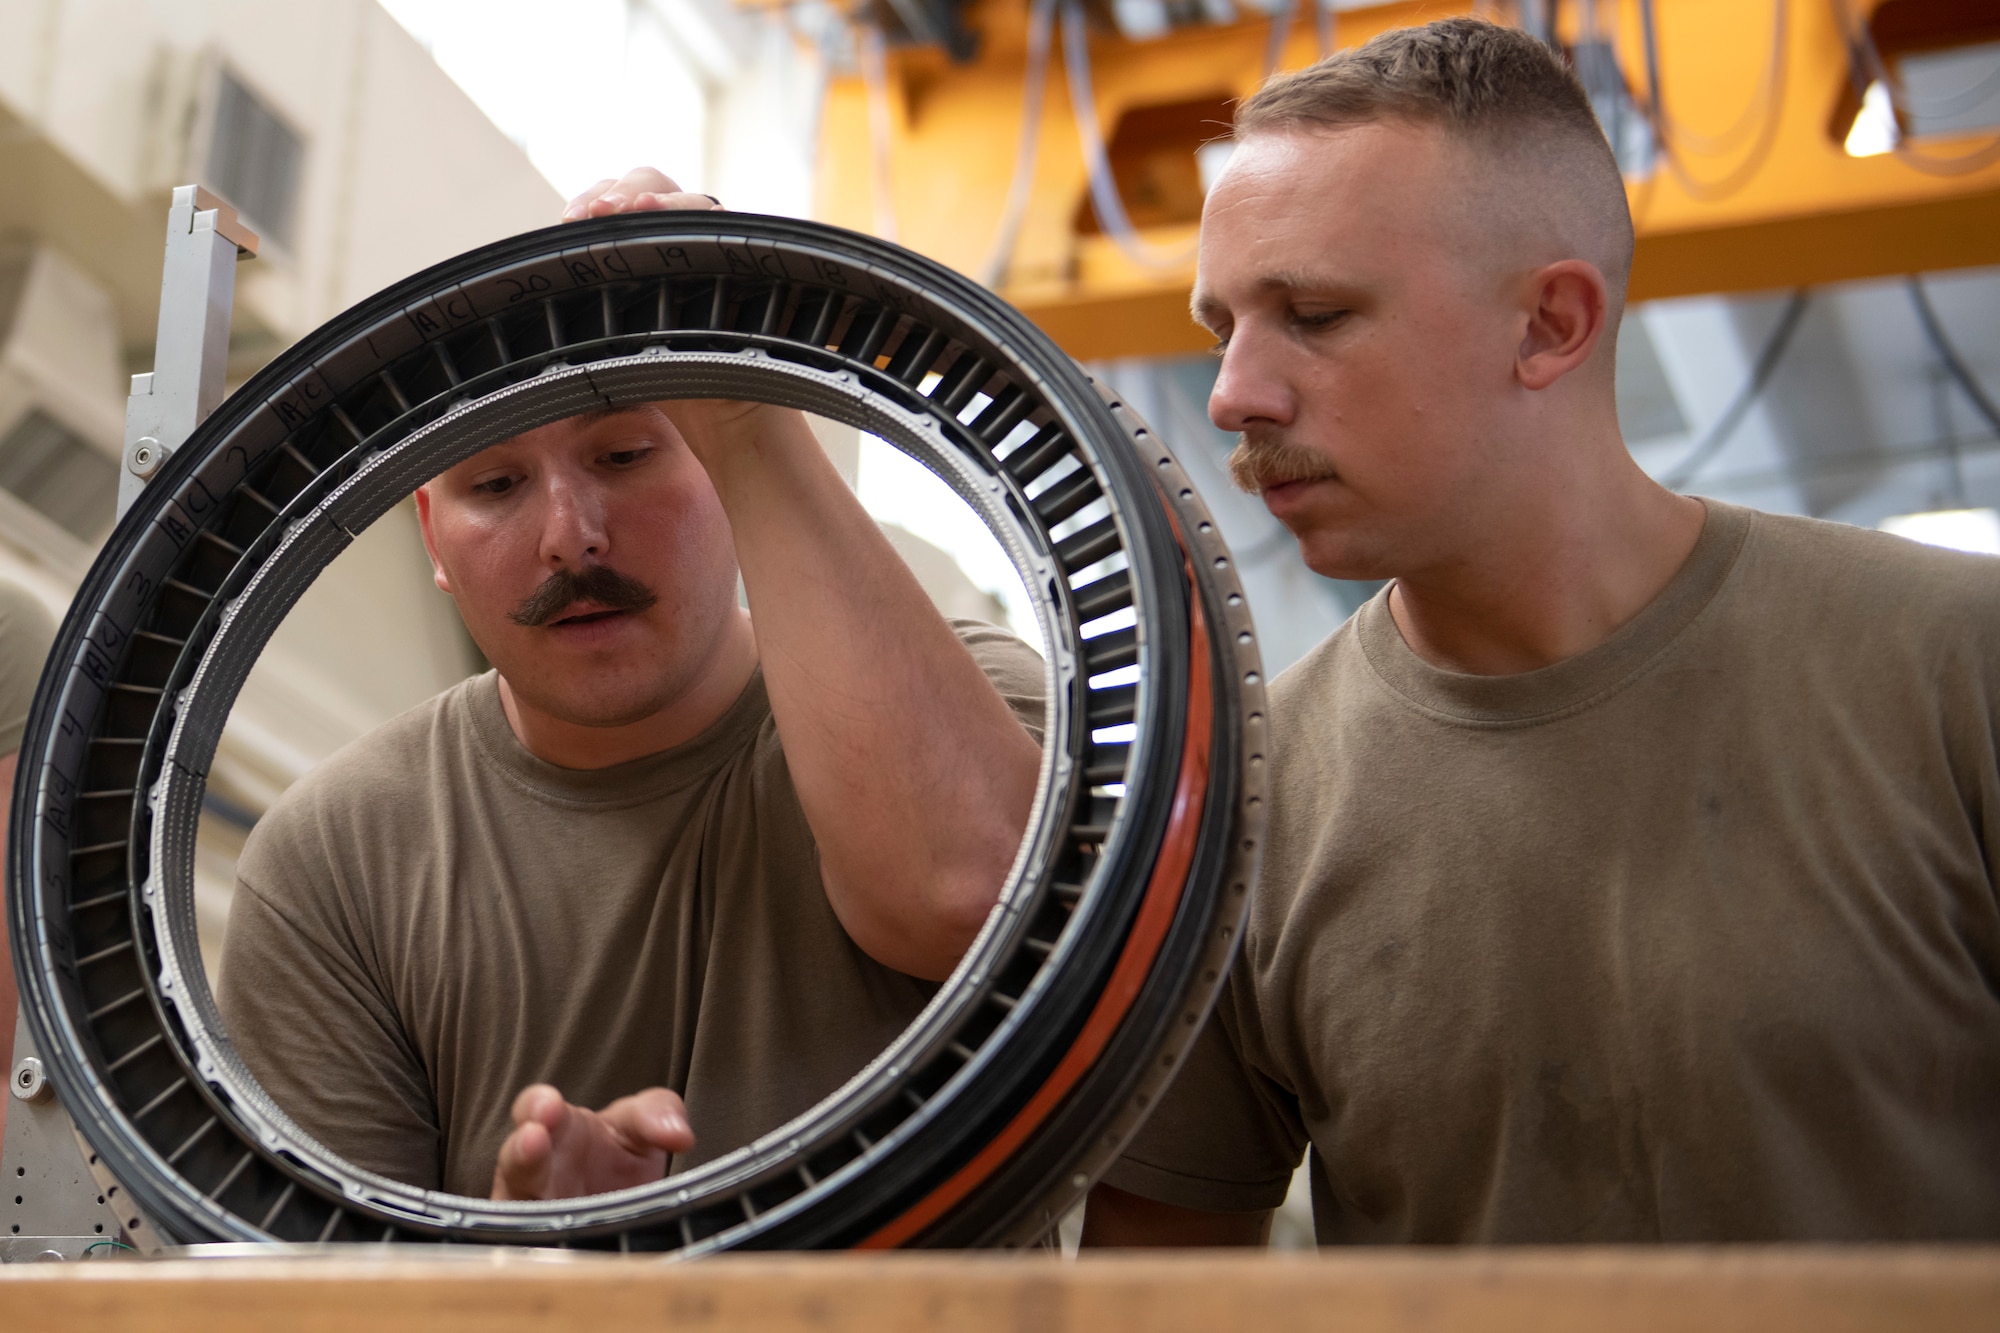 Staff Sgt. Brandon Mayer, left, and Senior Airman Matthew Wgeishofski, 18th Component Maintenance Squadron central repair facility technicians, examine the high pressure turbine shroud from a 25th Fighter Squadron A-10Thunderbolt II engine at Kadena Air Base, Japan, Aug. 30, 2022. The 18th CMS houses the only A-10 engine backshop in the Pacific Air Forces area of responsibility. Each year the Airmen service over a dozen of these engines from Osan Air Base. (U.S. Air Force photo by Senior Airman Jessi Roth)